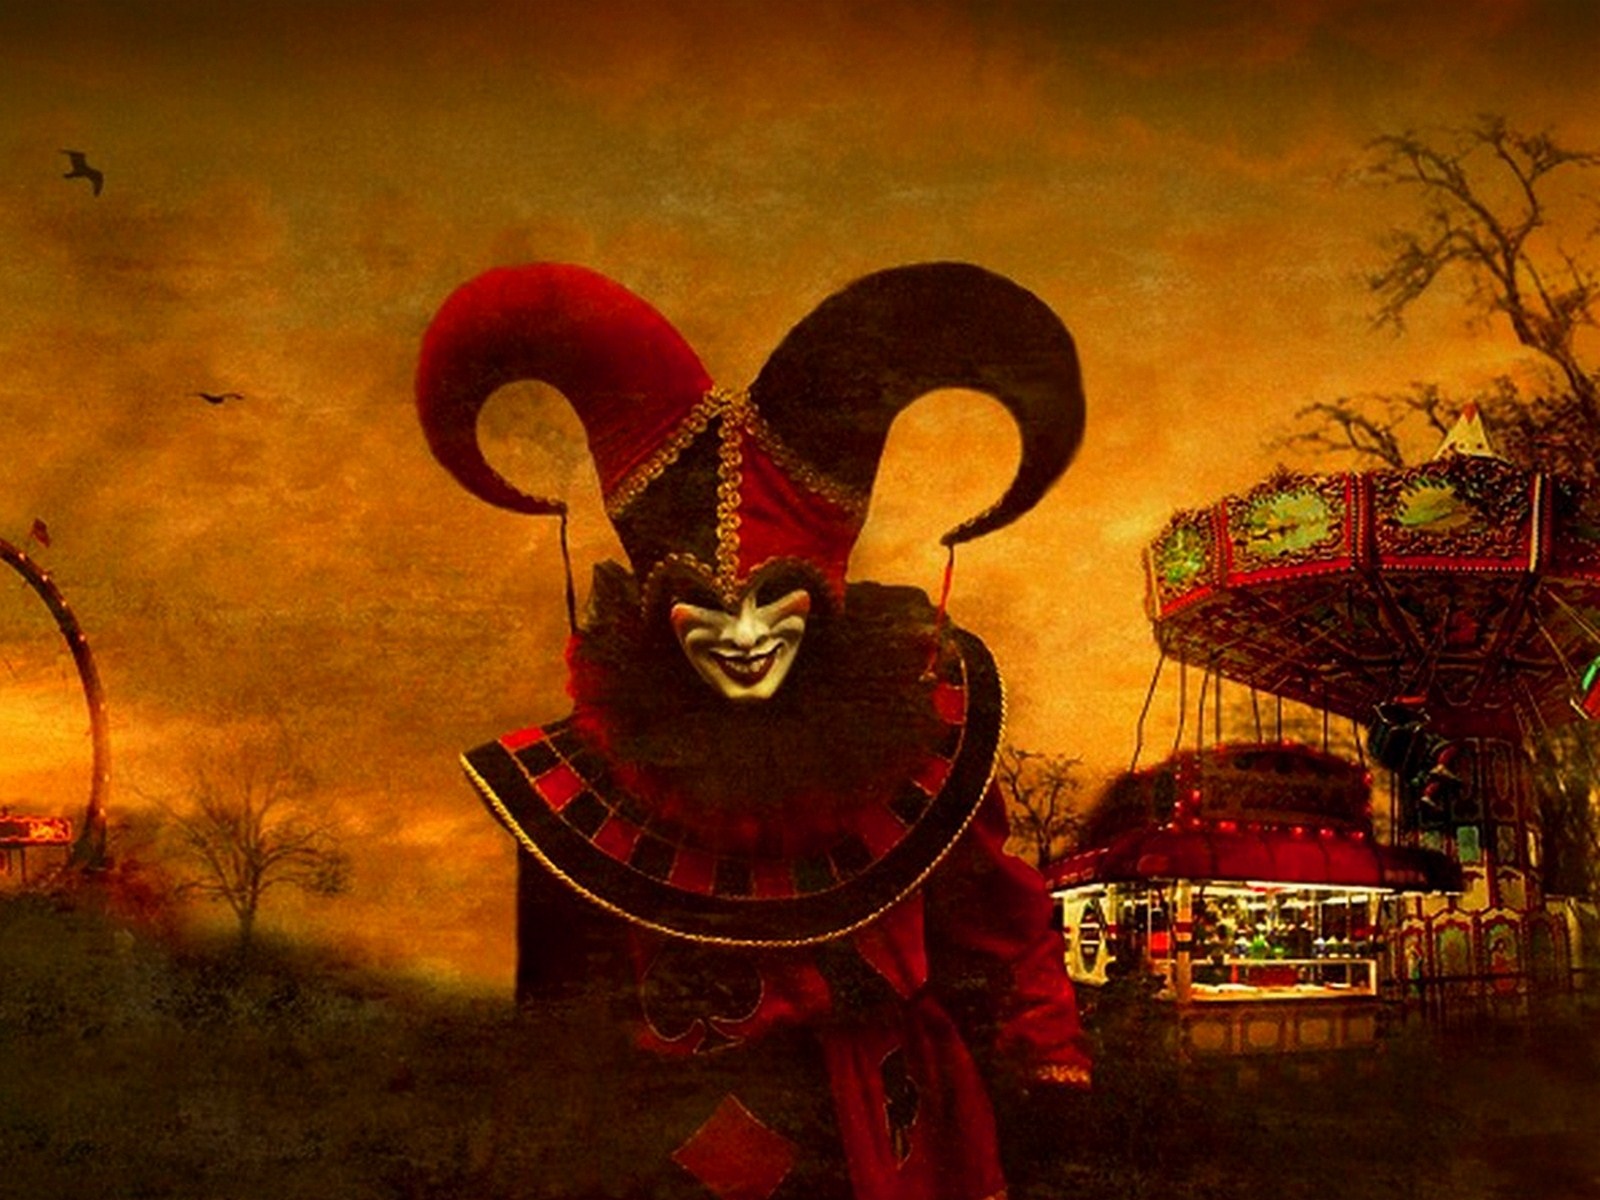 Scary Clown Wallpaper Submited Image